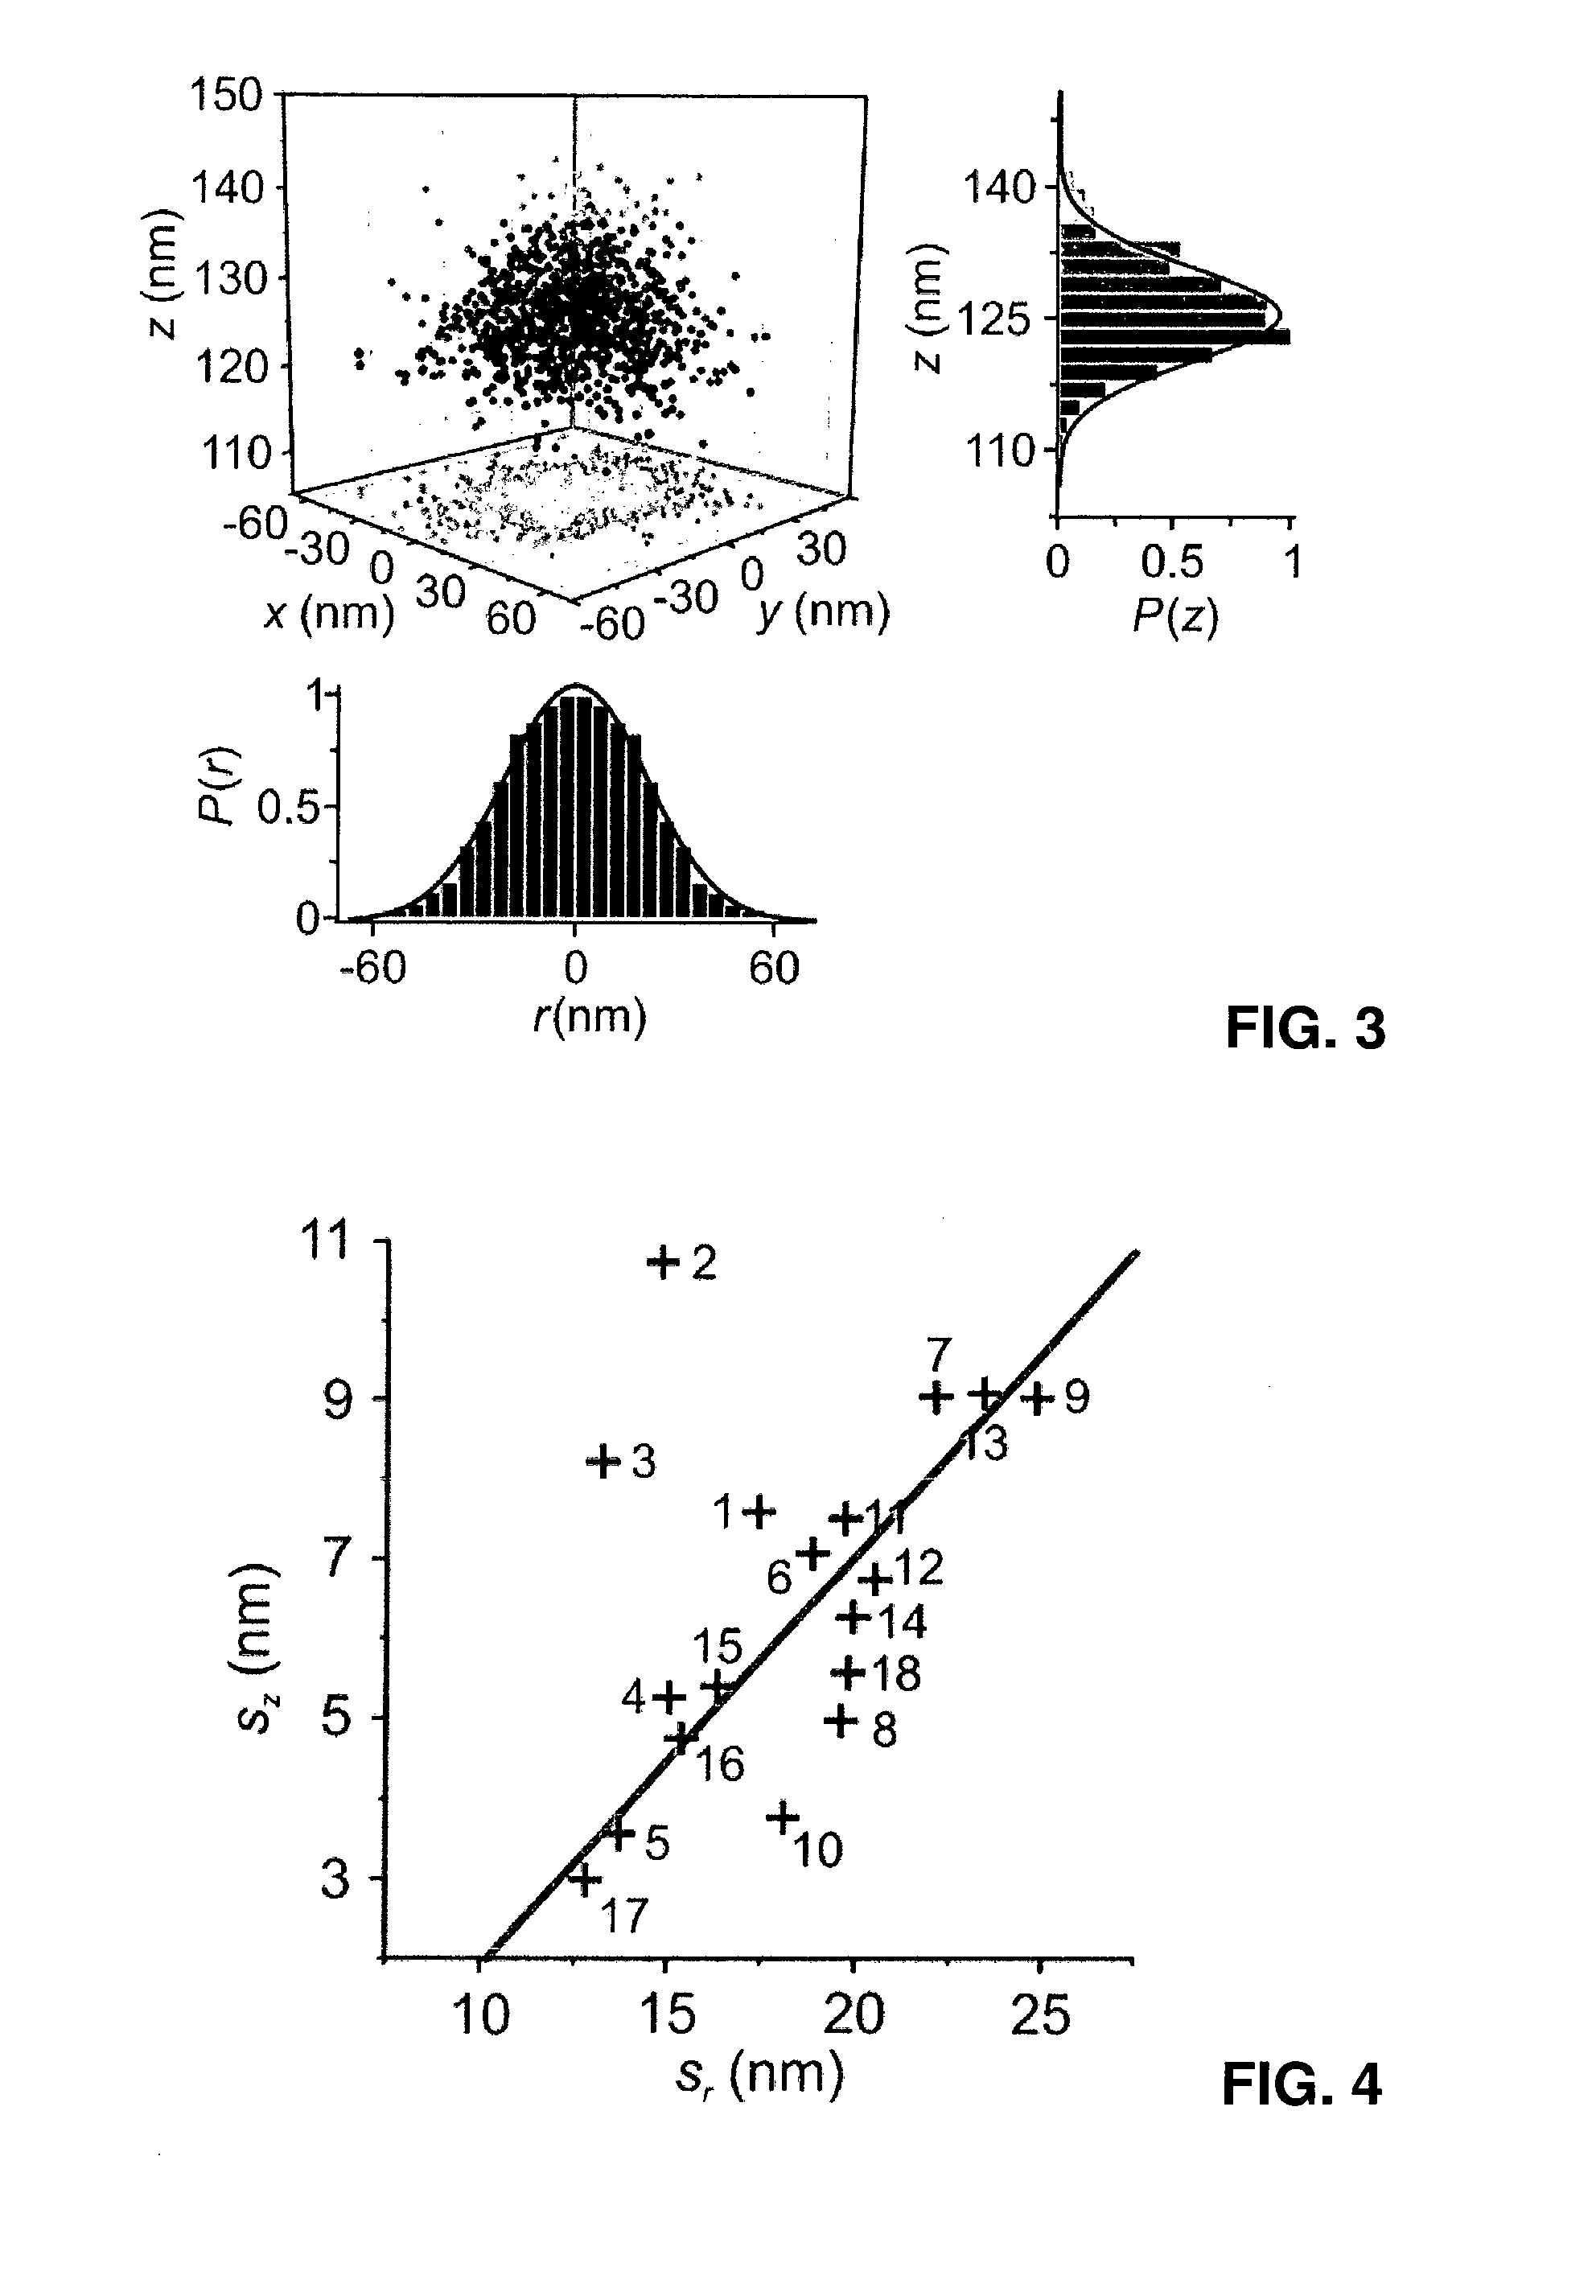 Method and apparatus for measuring charge and size of single objects in a fluid